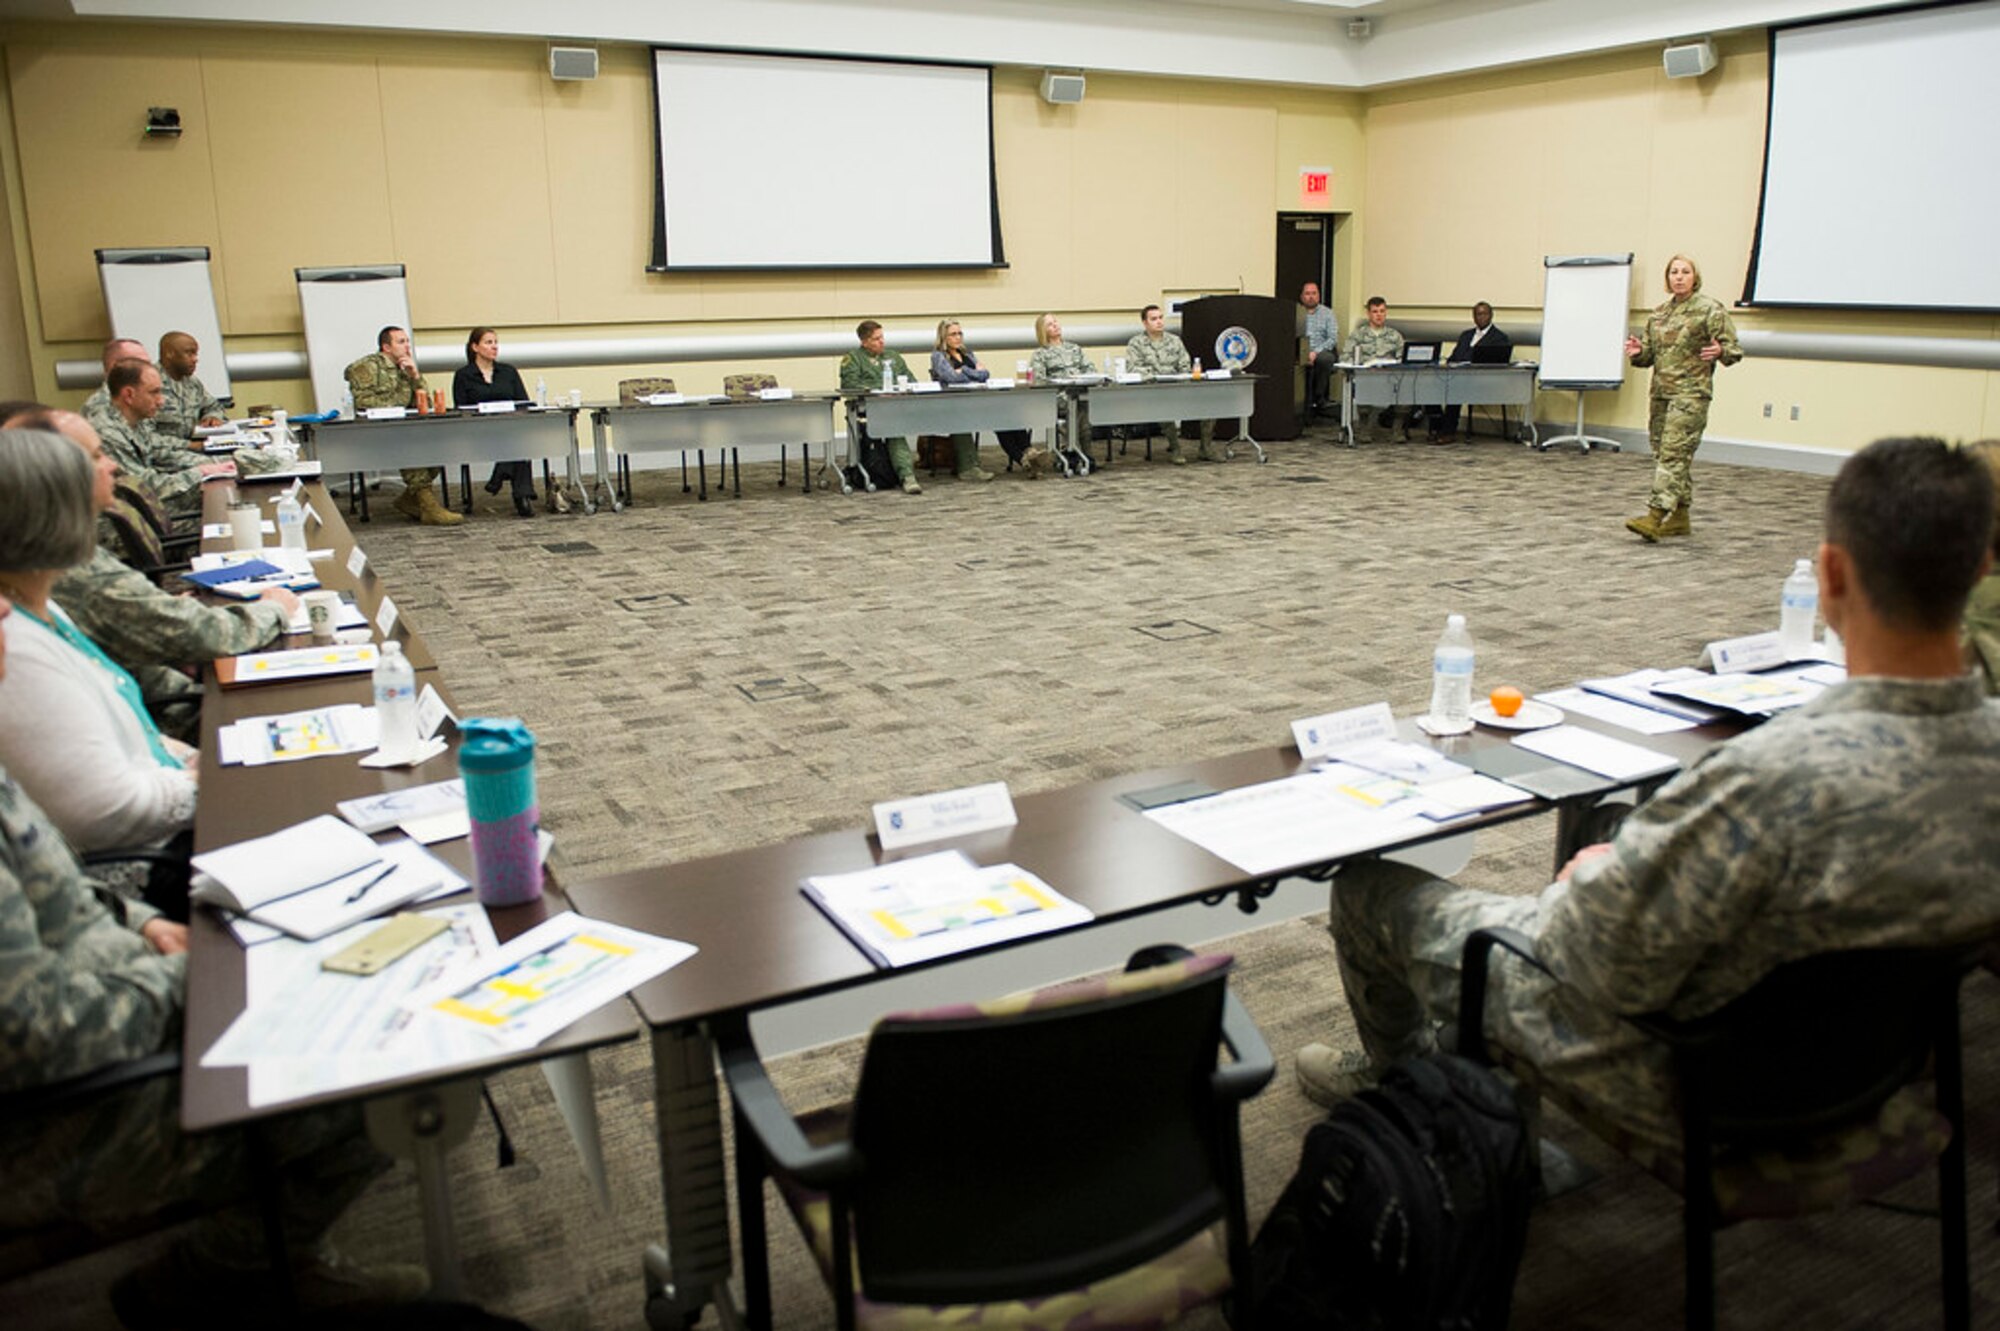 Chief Master Sgt. Melanie K. Noel, Air Force District of Washington command chief, gives opening remarks during the 2019 AFDW Squadron Commanders Course in the Gen. Jacob E. Smart Conference Center at Joint Base Andrews, Maryland, April 15, 2019. (U.S. Air Force photo by Master Sgt. Michael B. Keller)